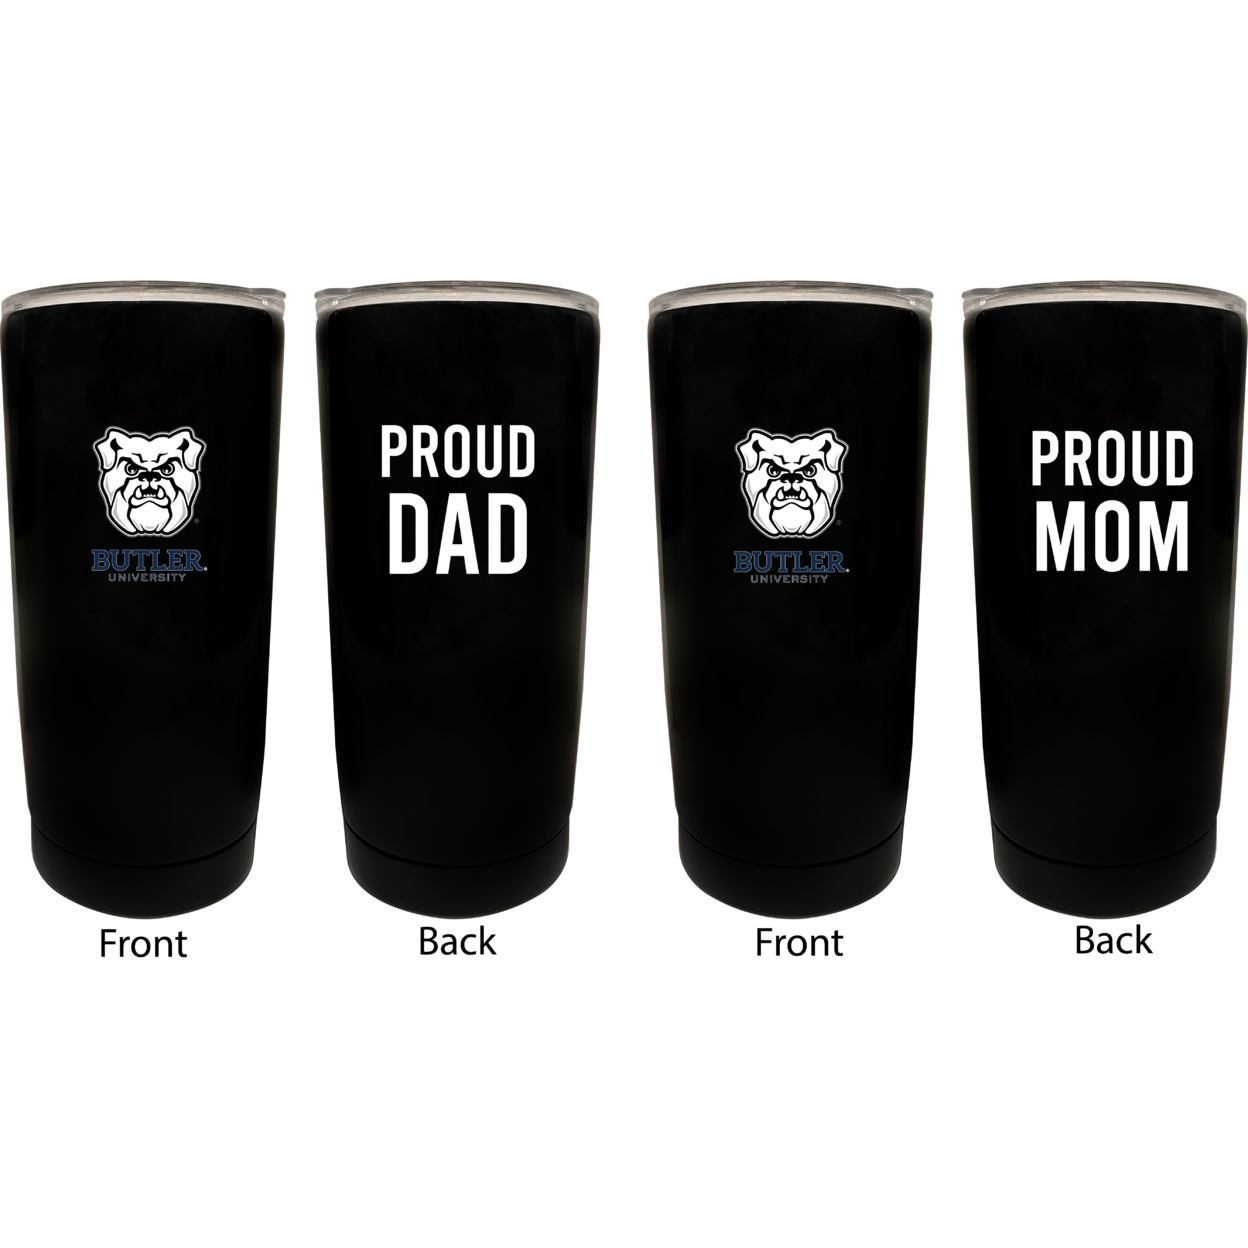 Butler Bulldogs Proud Mom And Dad 16 Oz Insulated Stainless Steel Tumblers 2 Pack Black.